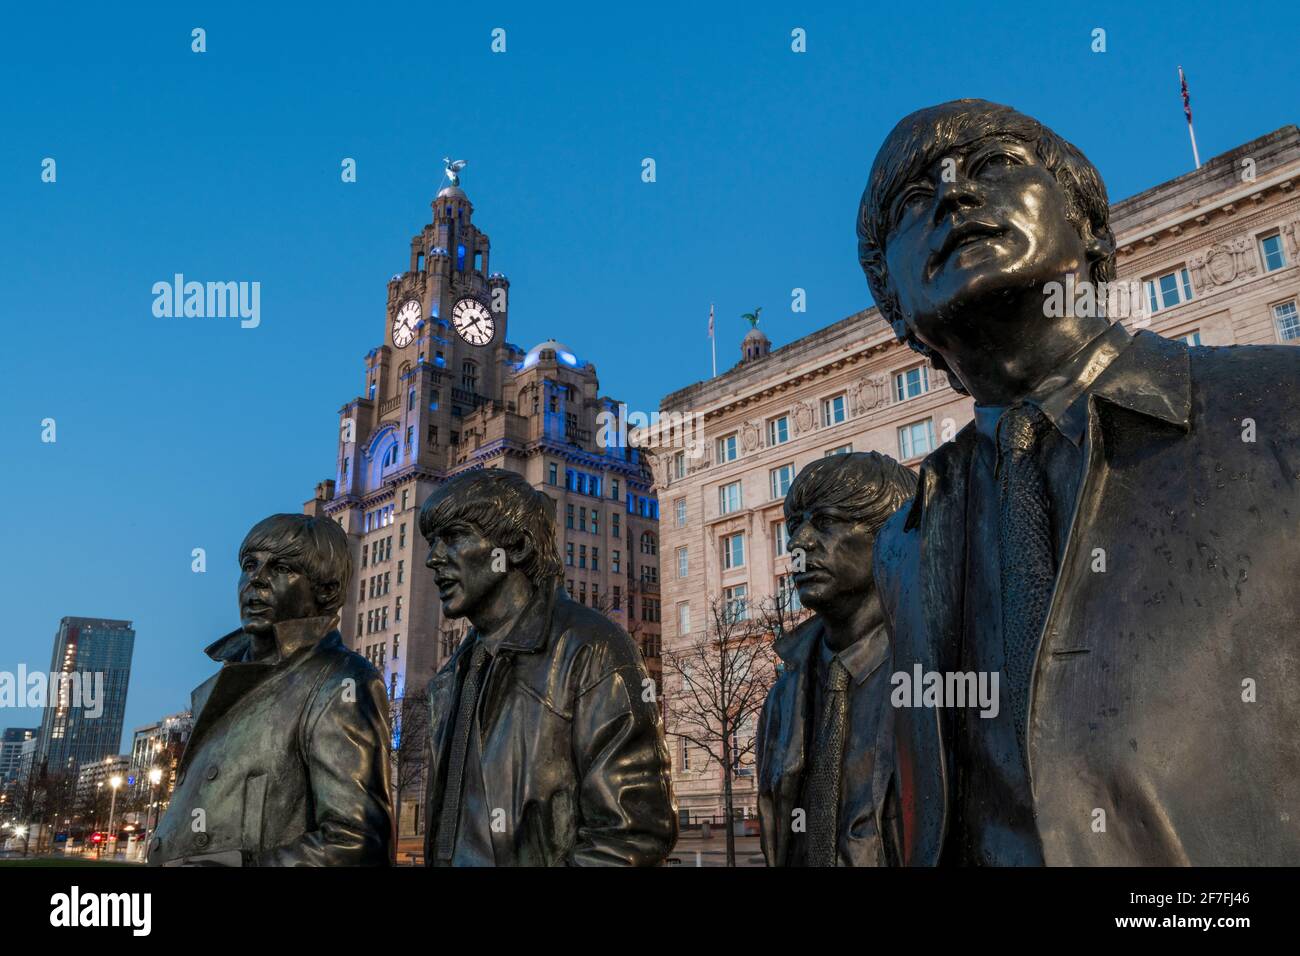 The Beatles statue at night, Liverpool waterfront, Liverpool, Merseyside, England, United Kingdom, Europe Stock Photo